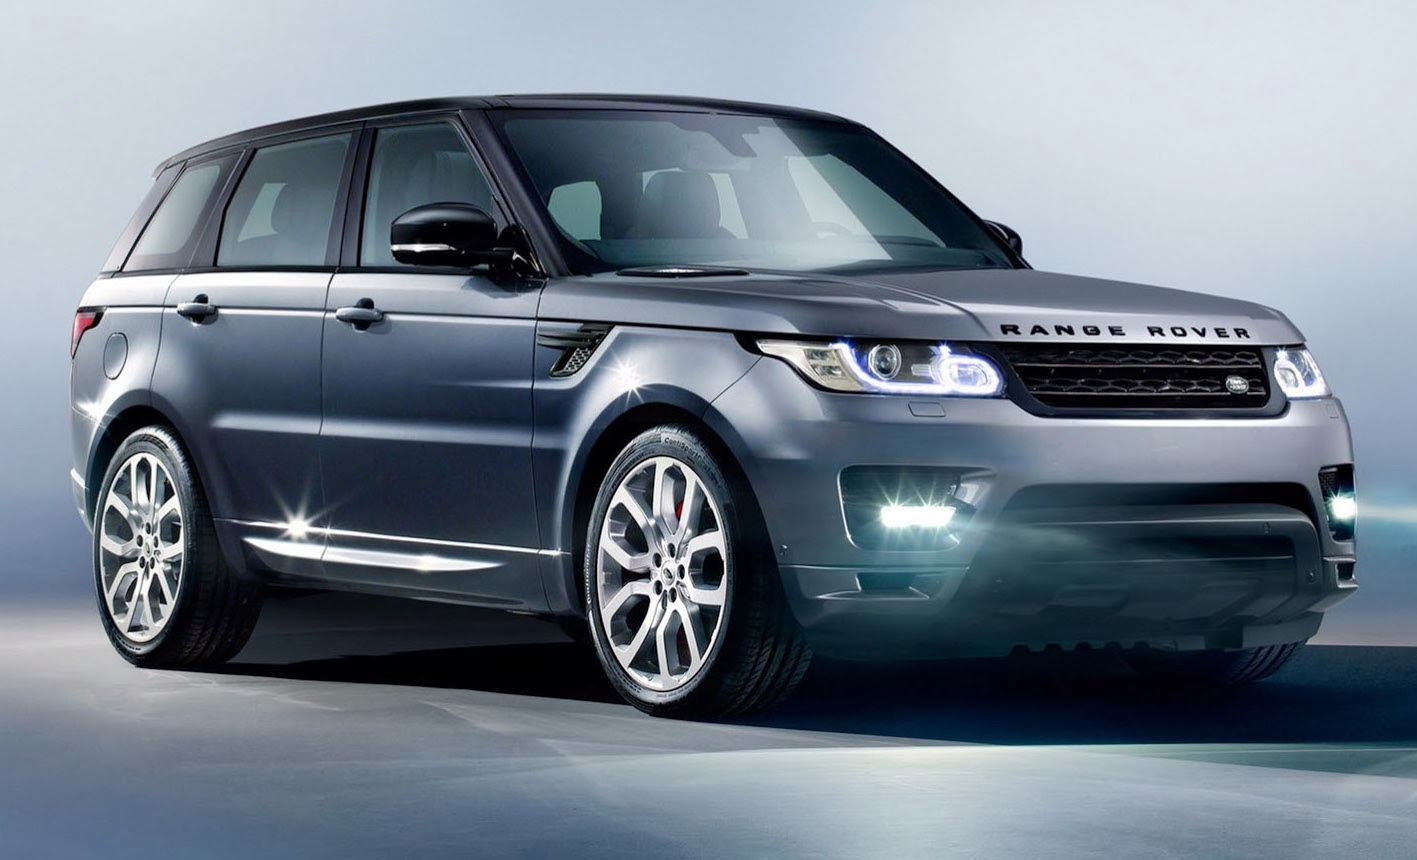 Range rover sport owners manual